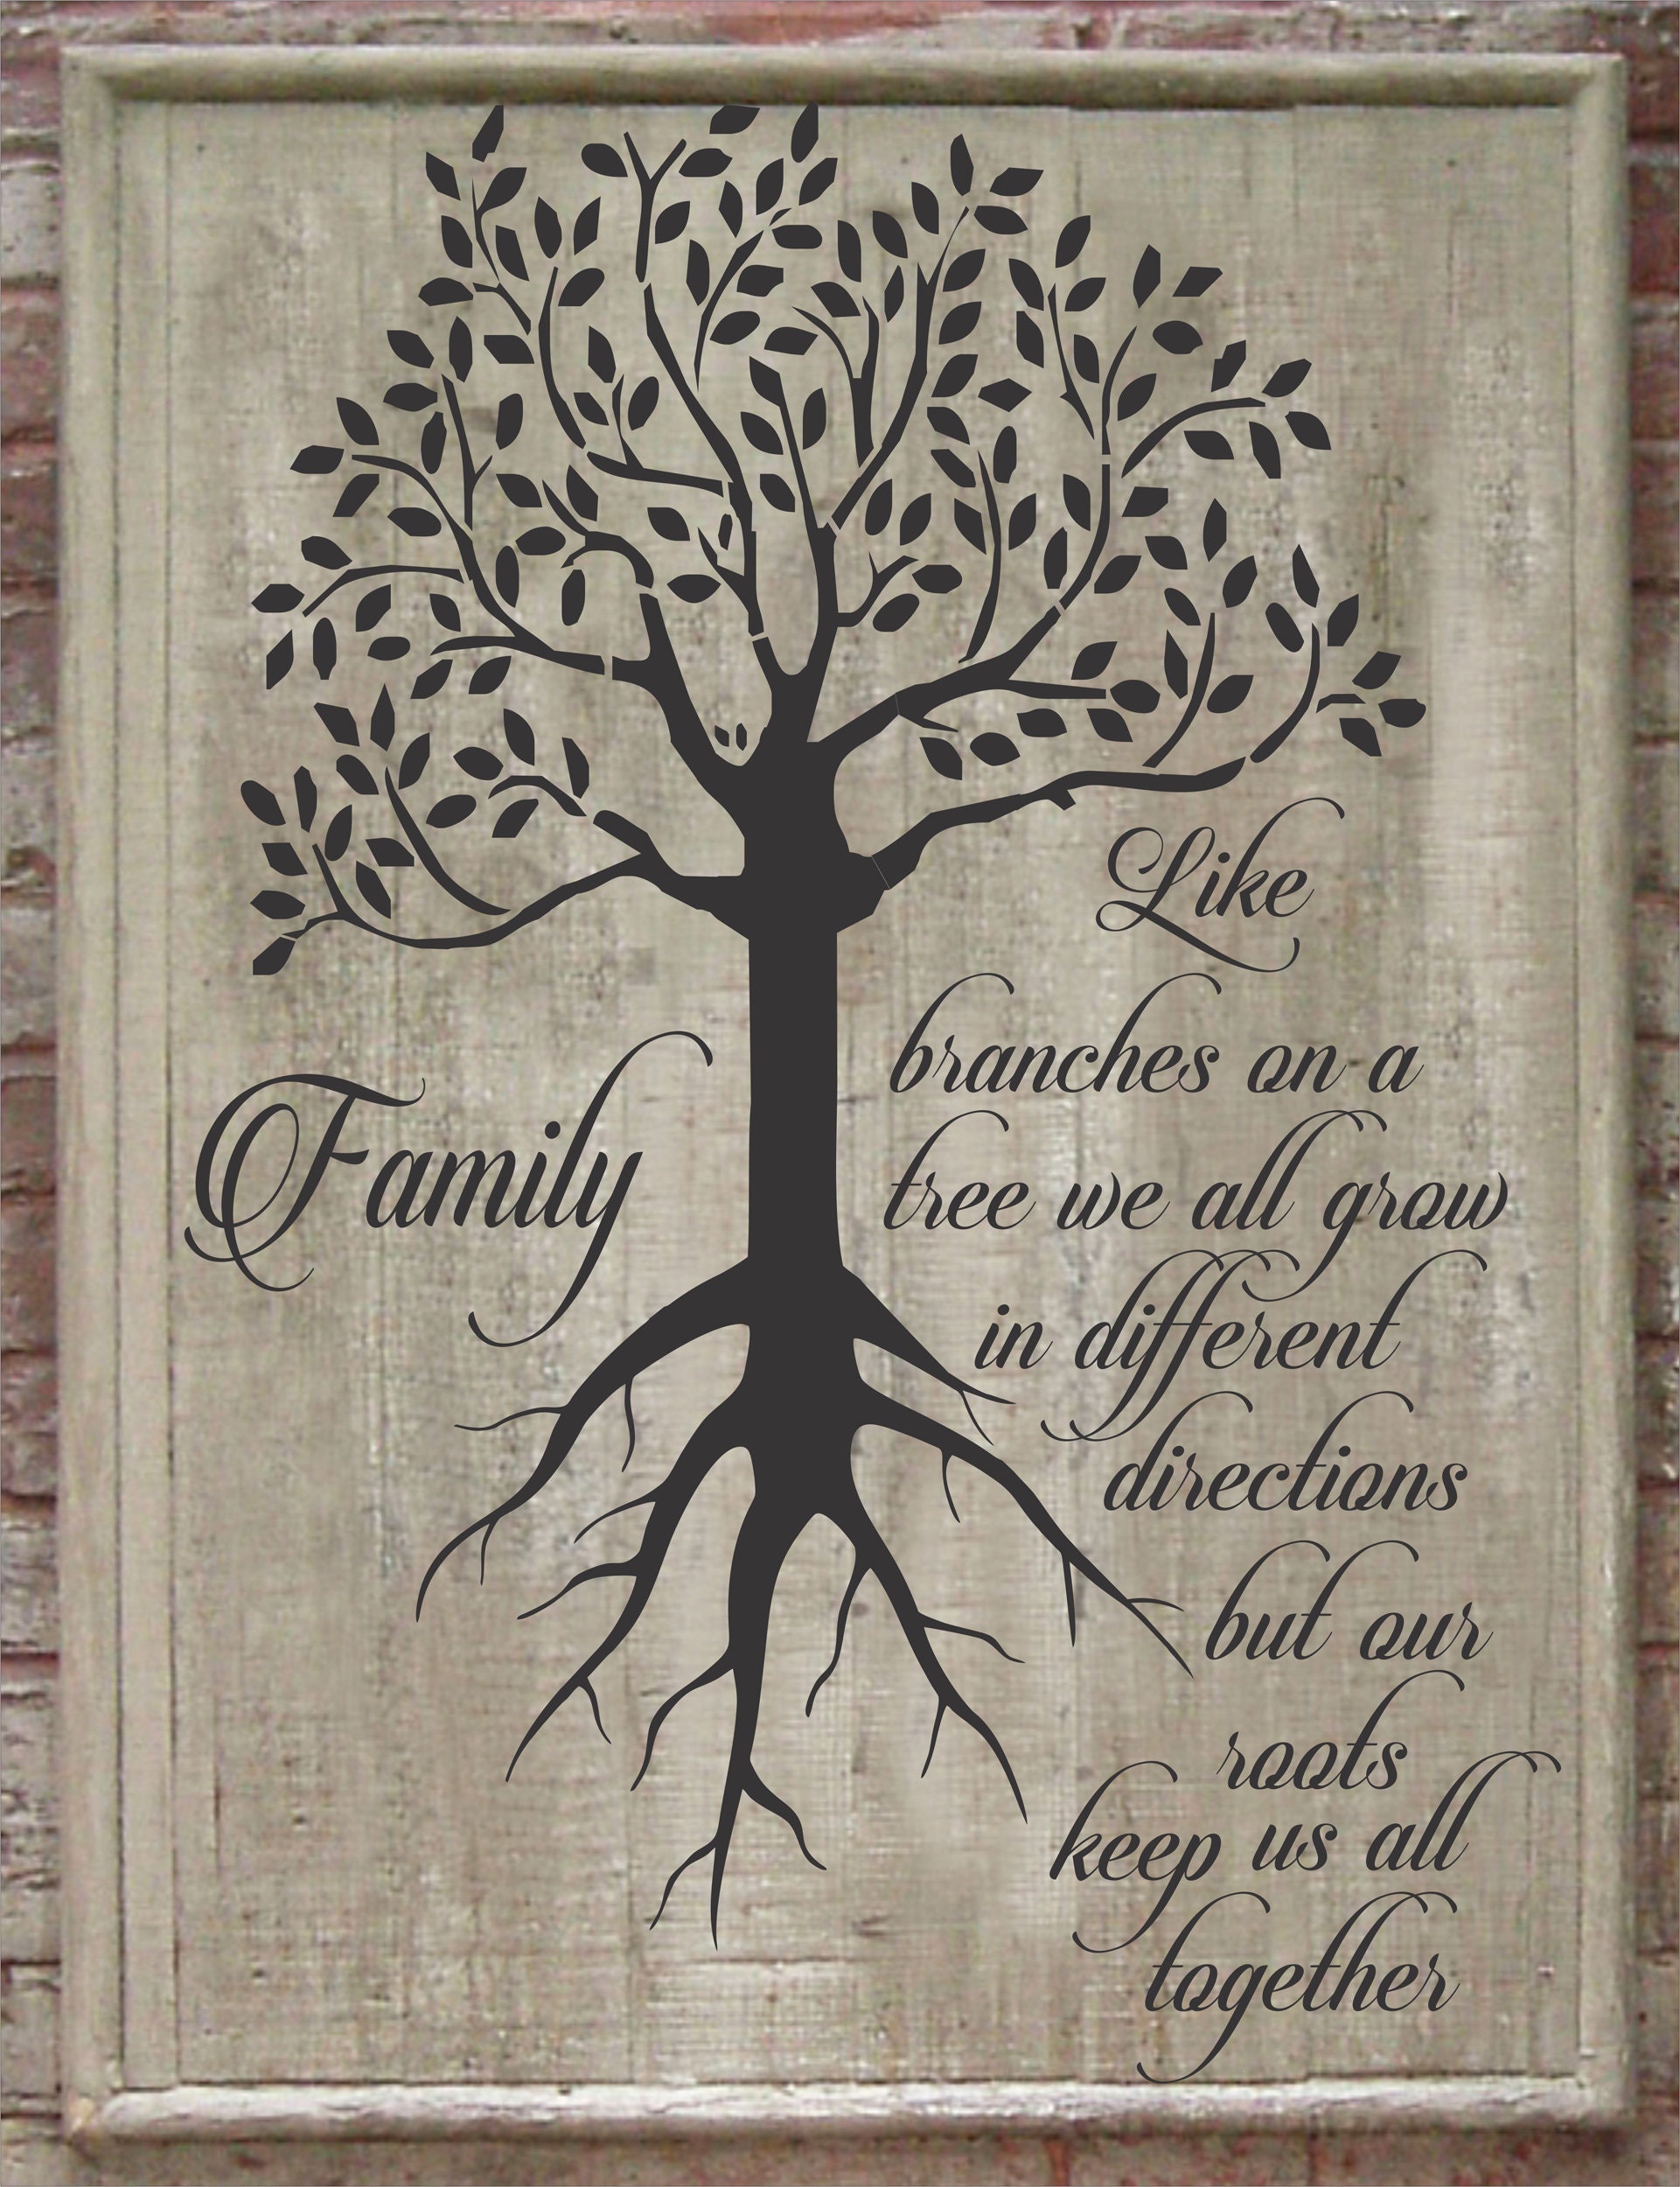 family-like-branches-on-a-tree-stencil-reusable-stencils-5-etsy